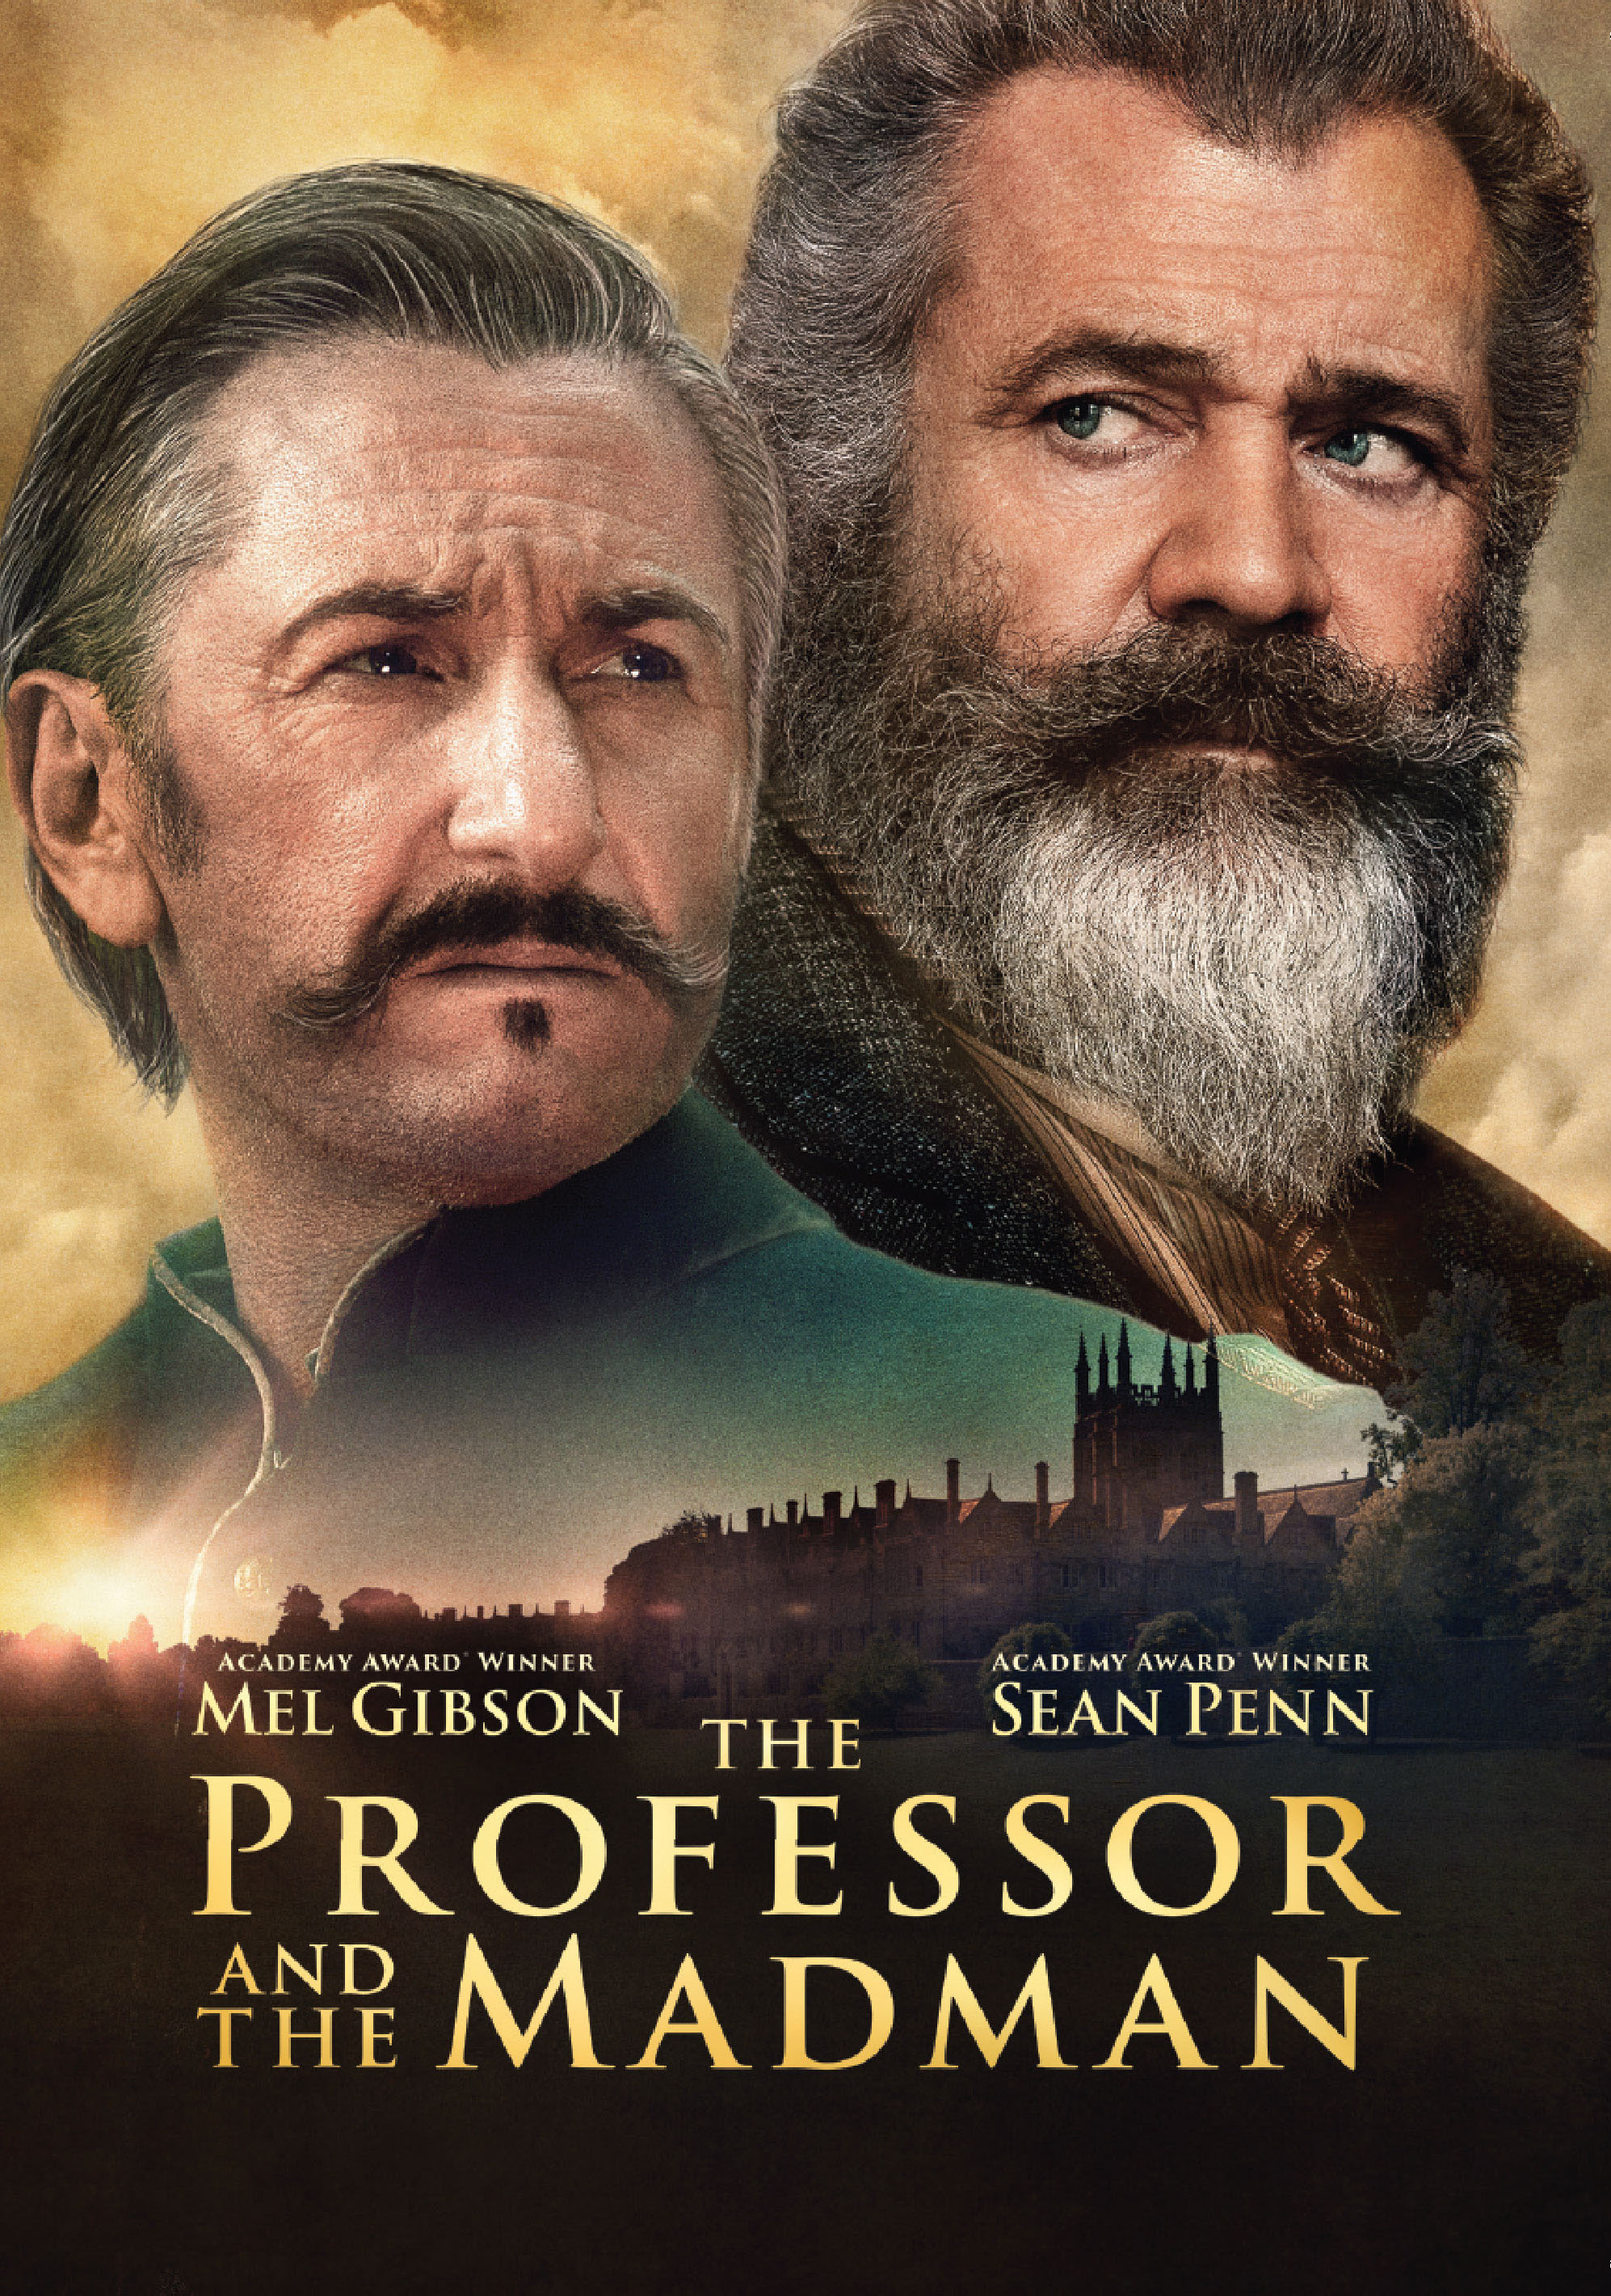 The Professor and the Madman [DVD] [2017] - Best Buy